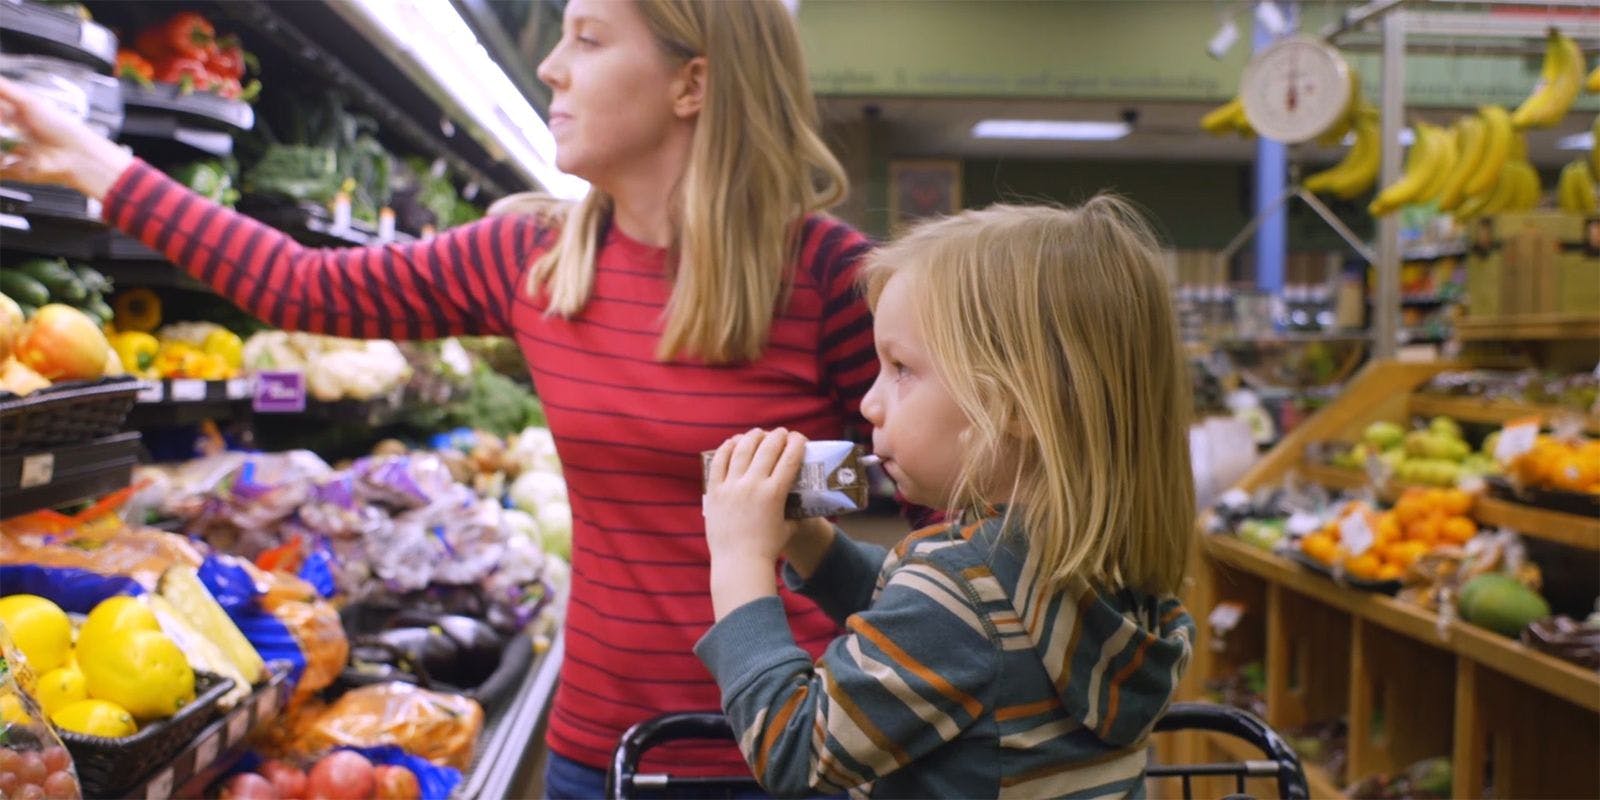 A woman shops in the produce aisle with a young child in the cart seat drinking chocolate milk.